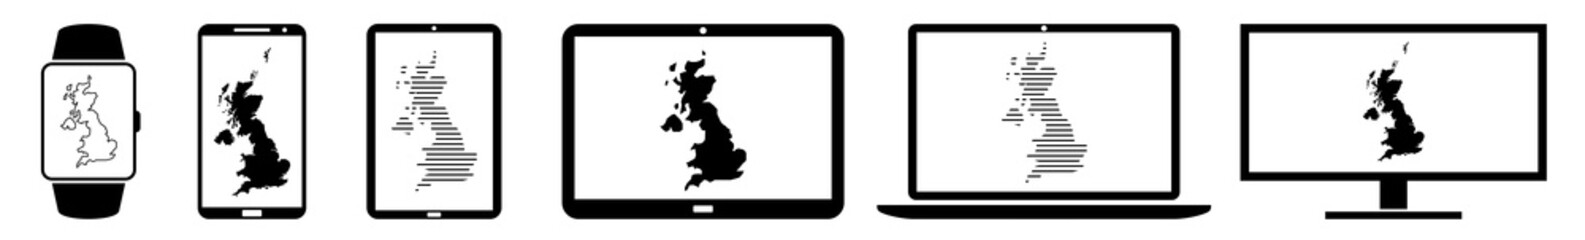 Display great, britain, england, map, border, state Icon Devices Set | Web Screen Device Online | Laptop Vector Illustration | Mobile Phone | PC Computer Smartphone Tablet Sign Isolated